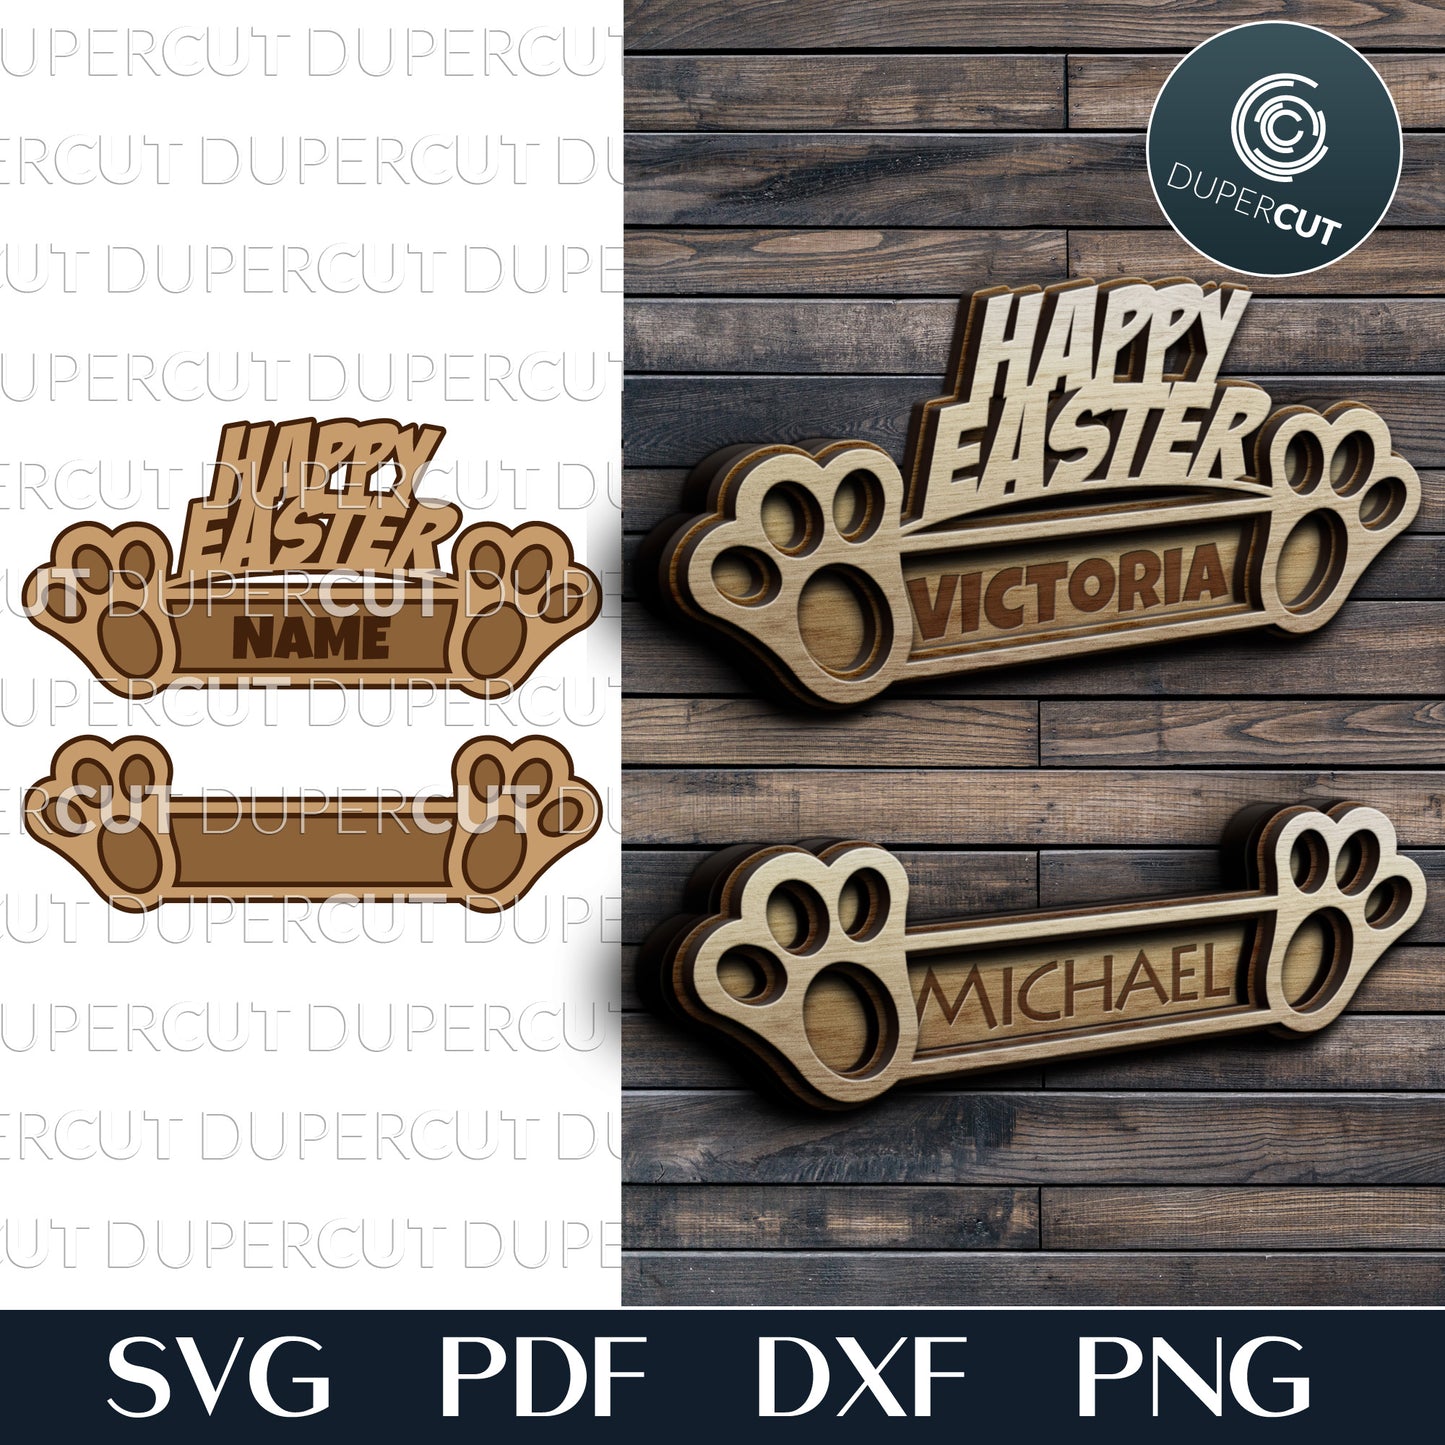 Bunny paw Easter tag - add custom name - SVG PDF DXF vector files for laser cutting with Glowforge, Cricut, Silhouette Cameo, CNC plasma machines